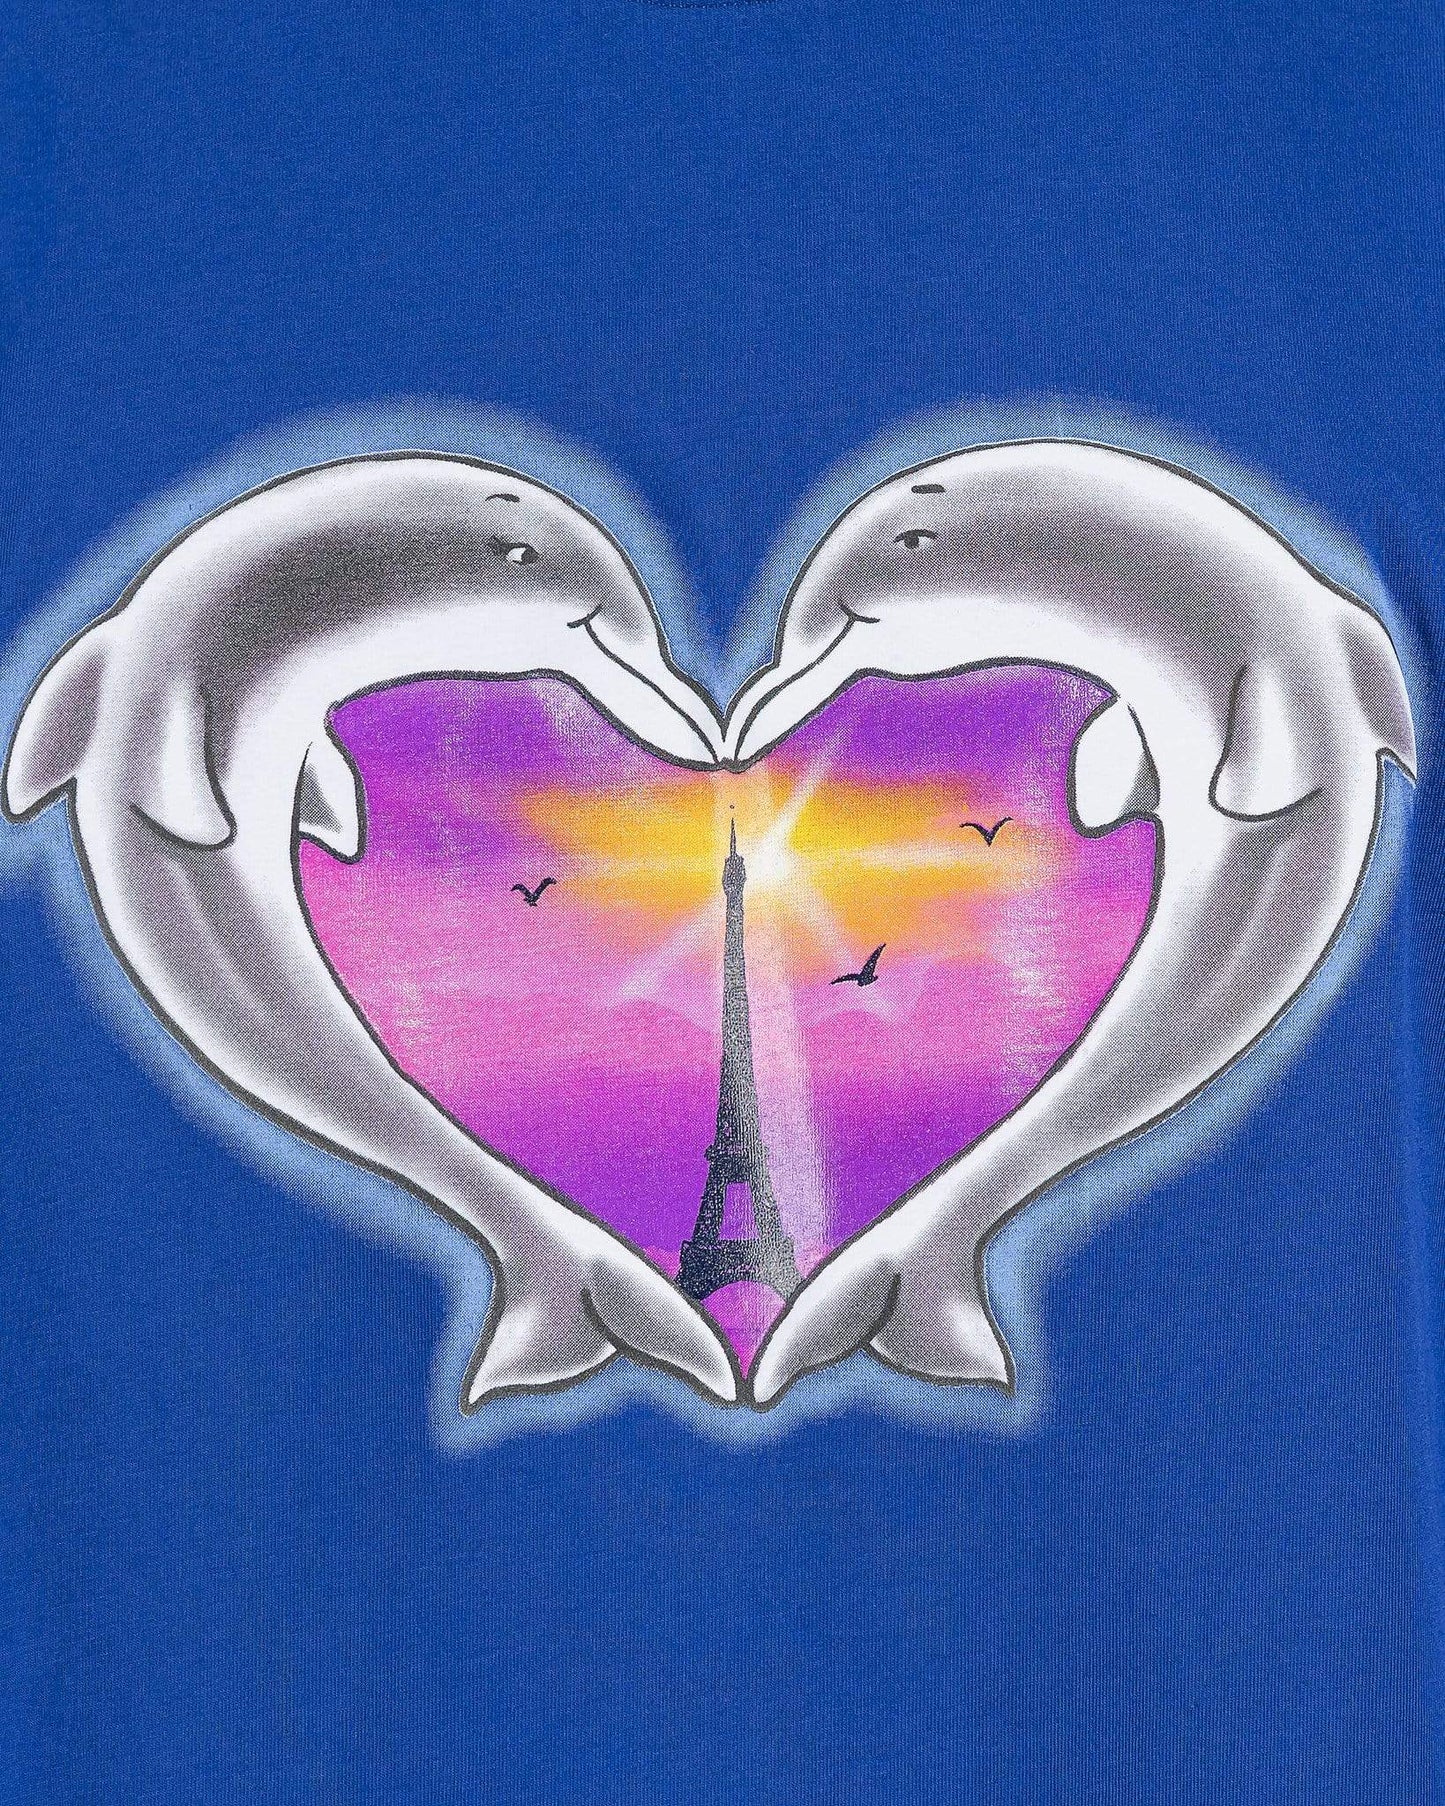 VETEMENTS Men's T-Shirts Dolphins Heart Logo Tee in Blue